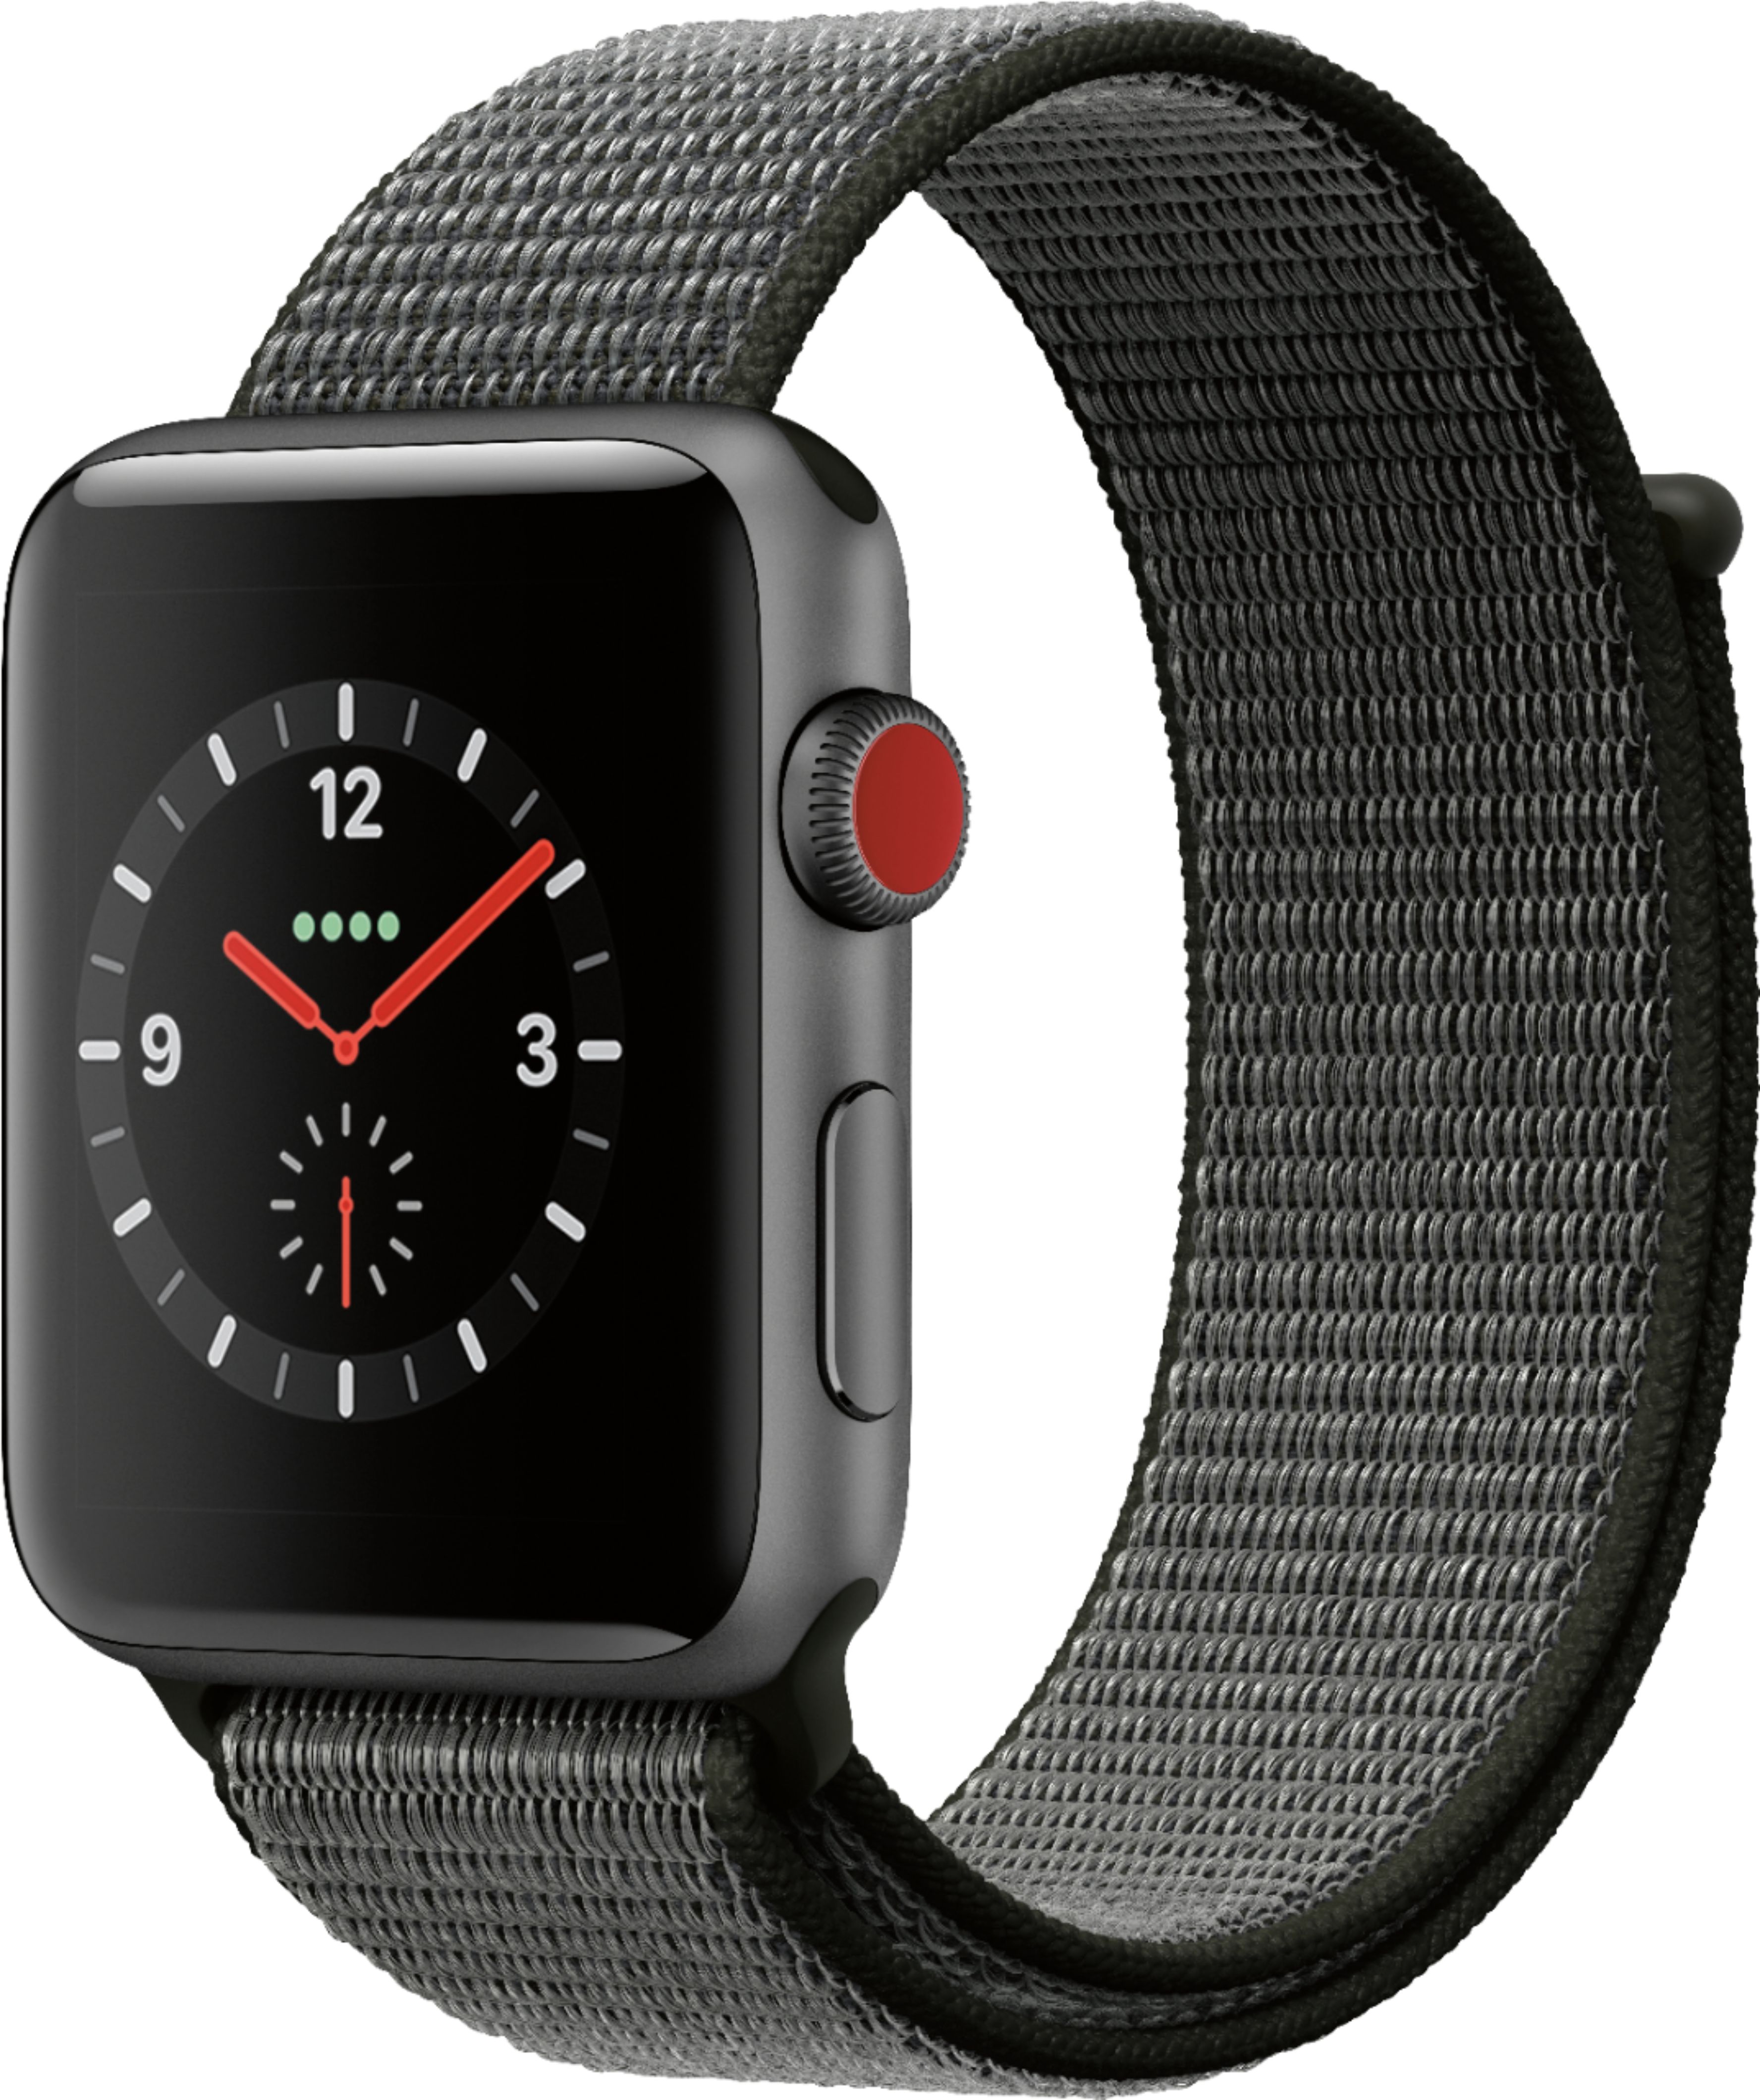 apple watch 3 with cellular 42mm